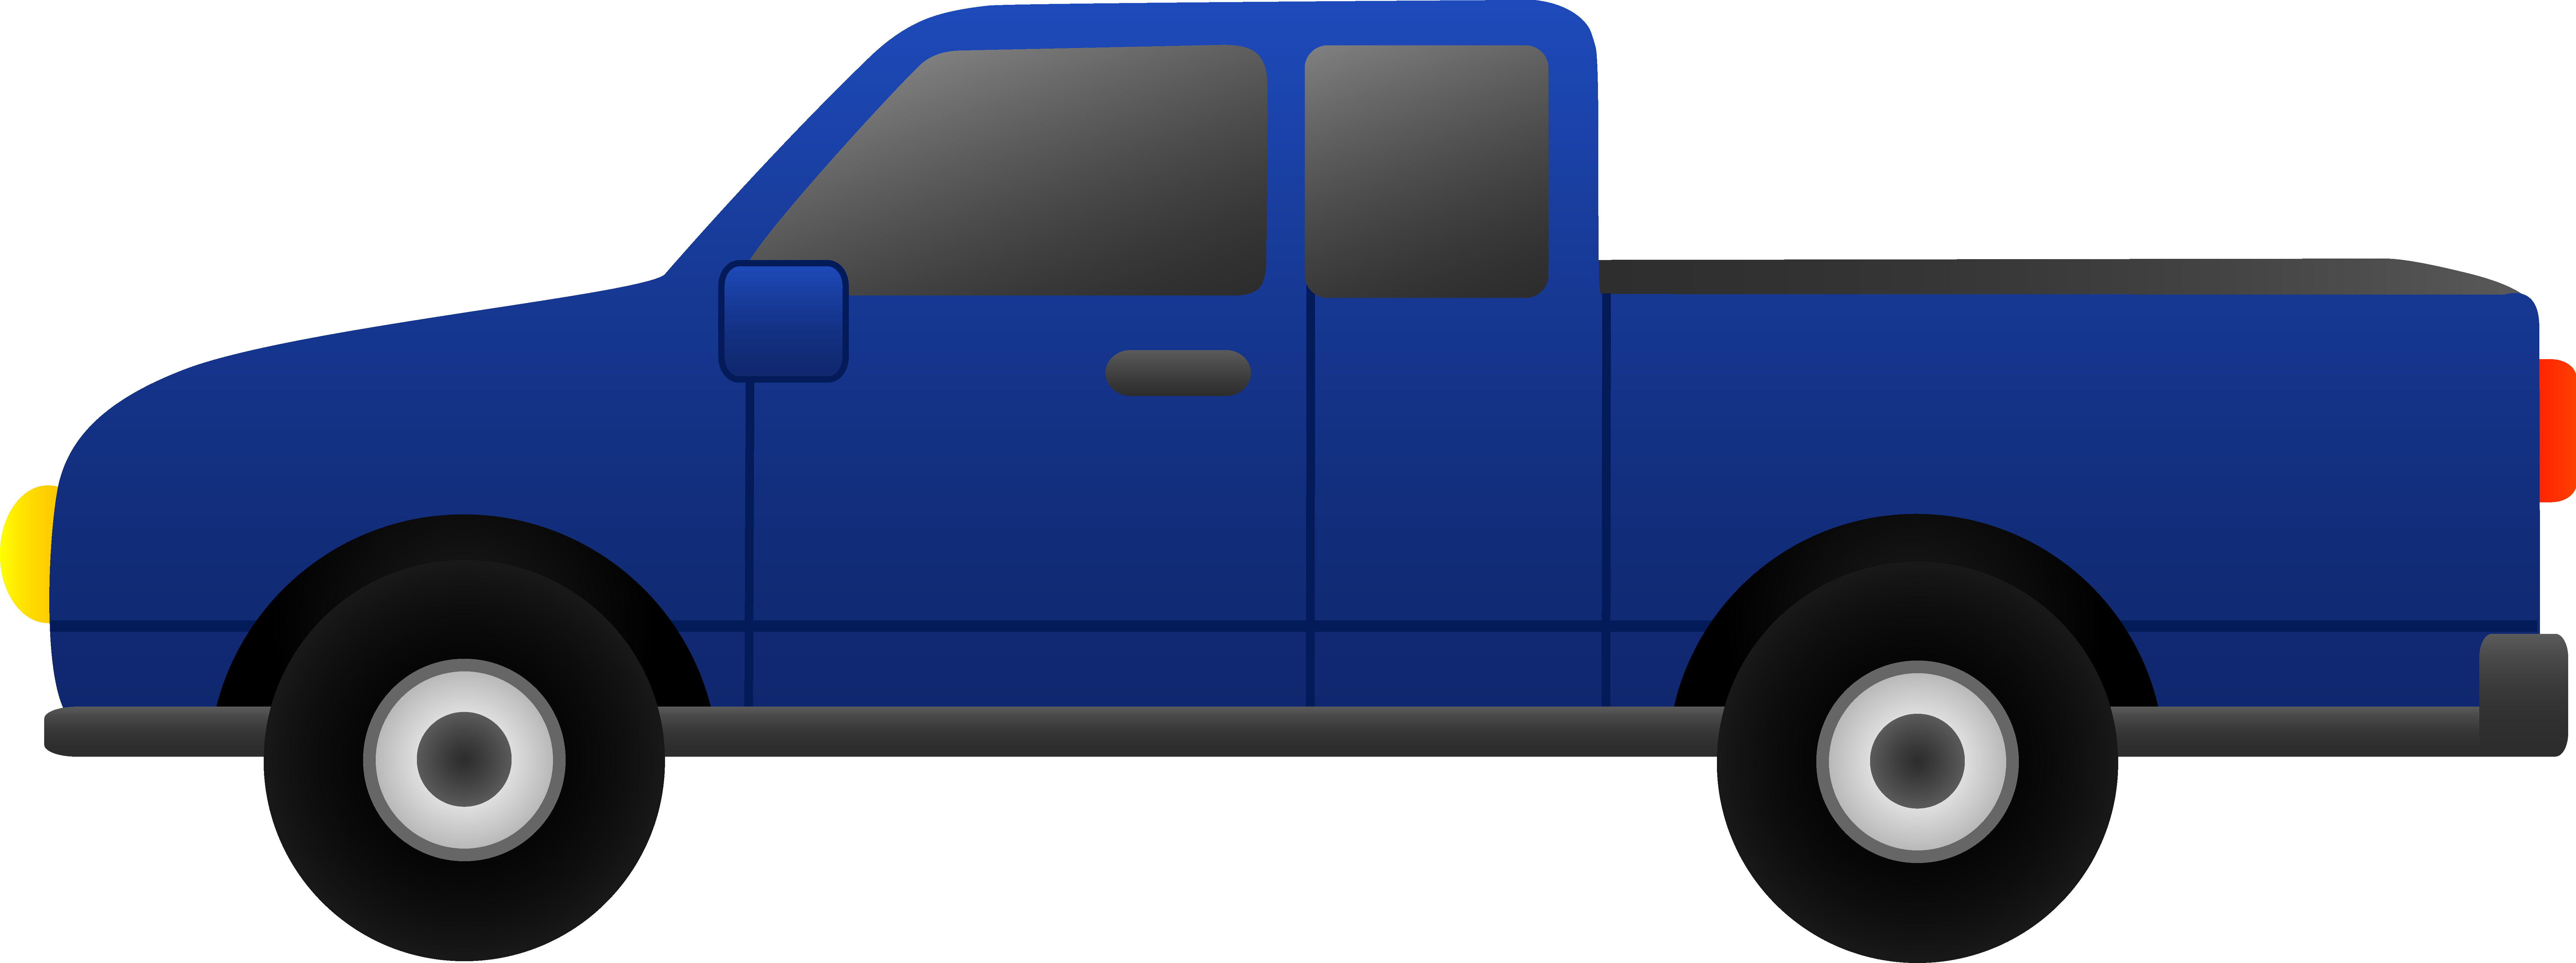 Back of pickup truck clipart.